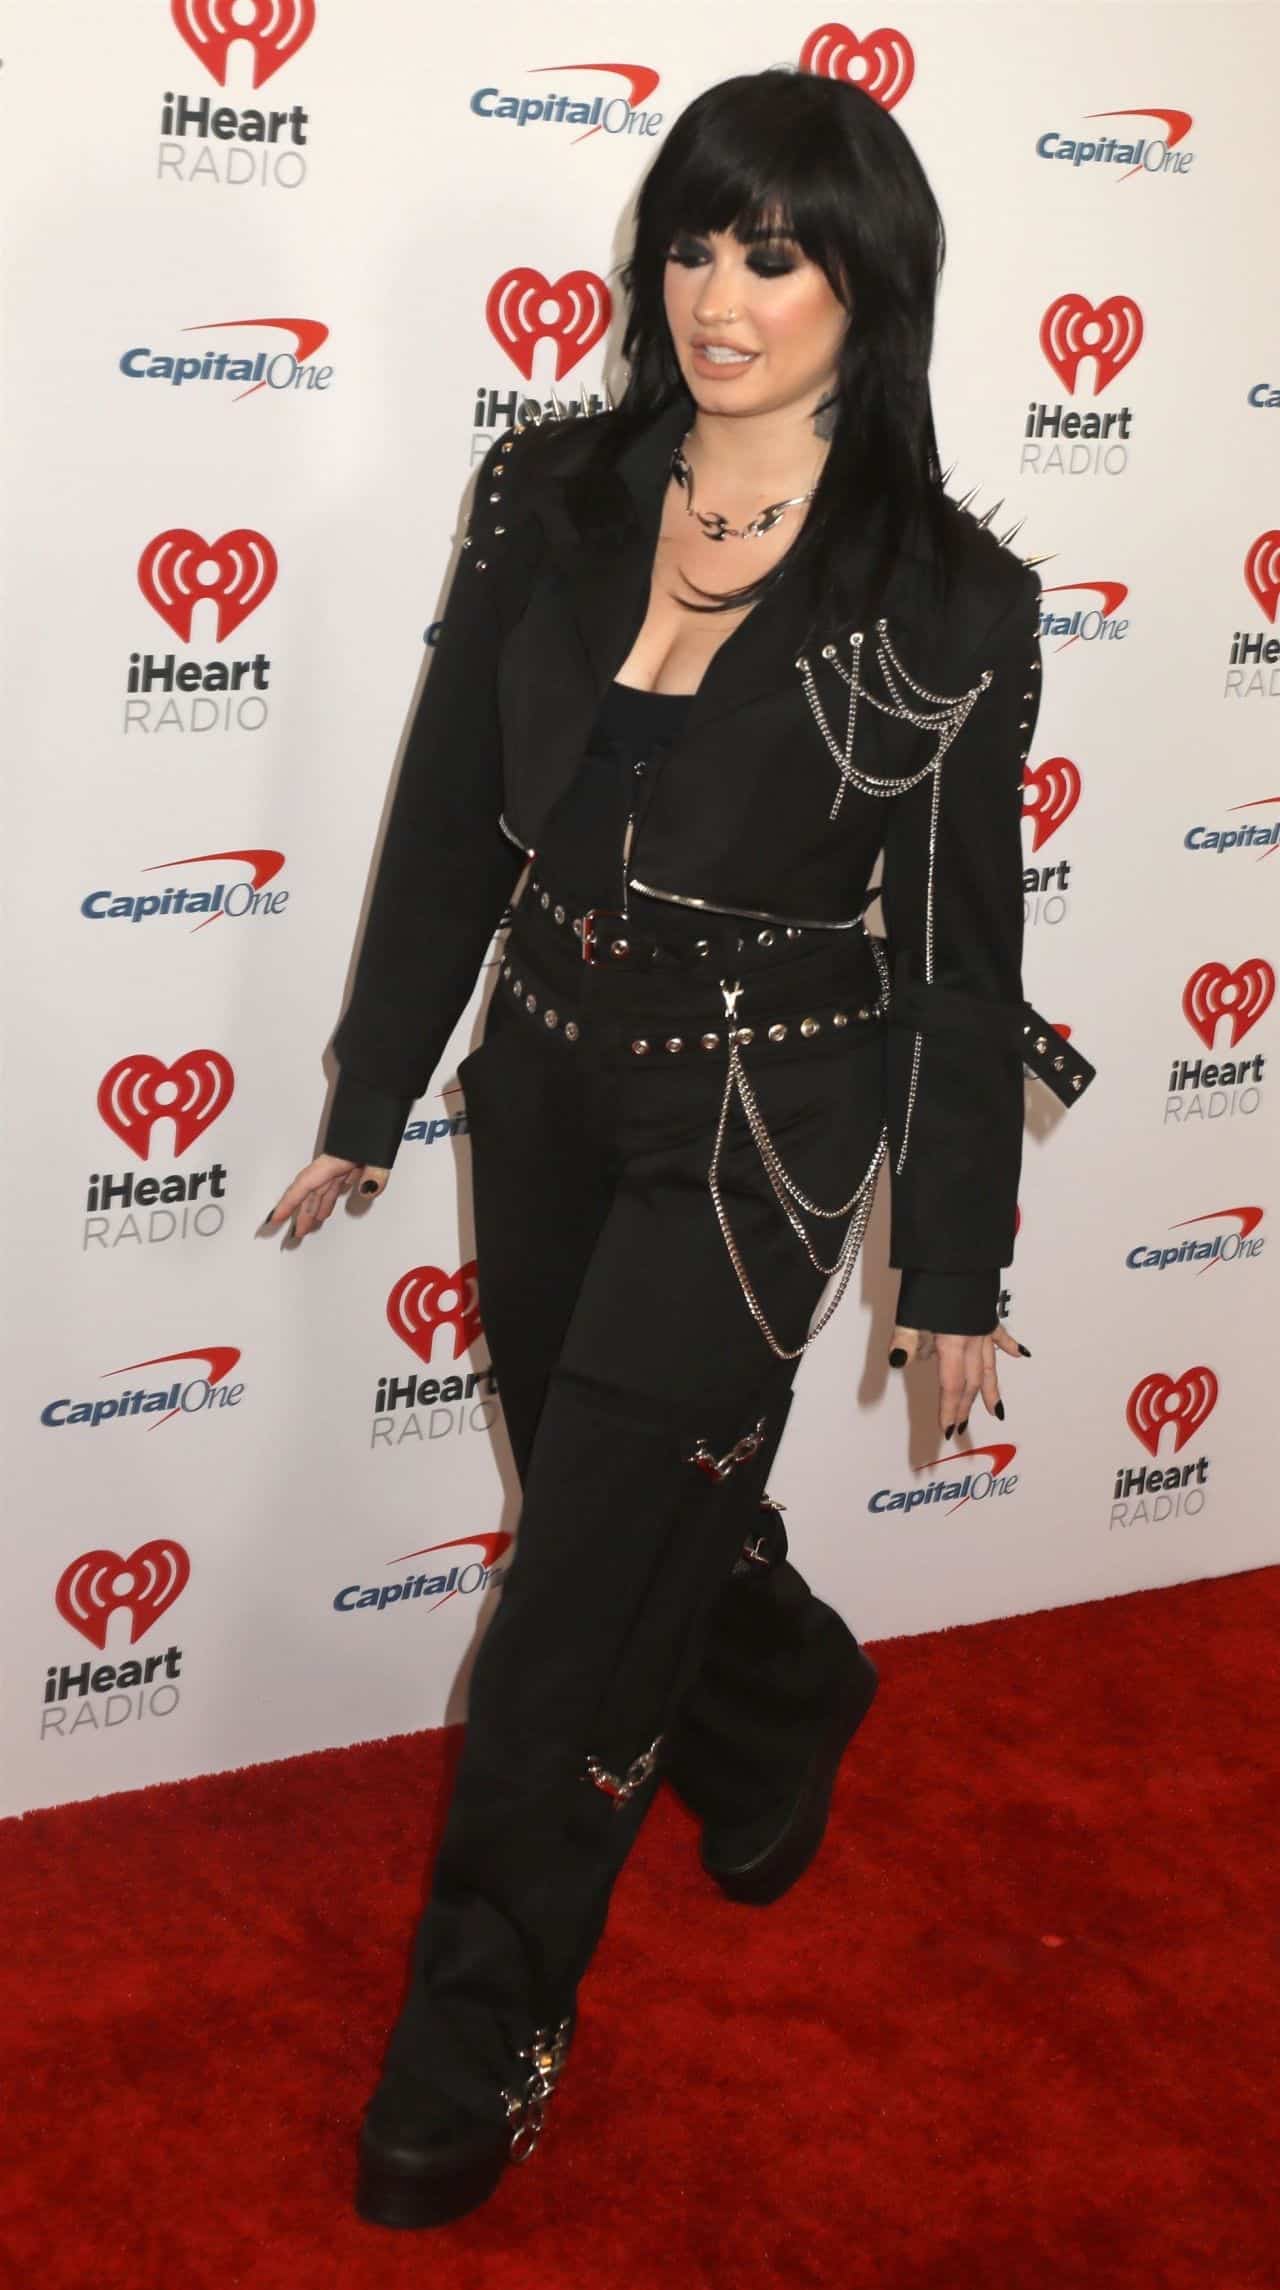 Demi Lovato Performs at Z100's iHeartRadio 2022 Jingle Ball in NYC